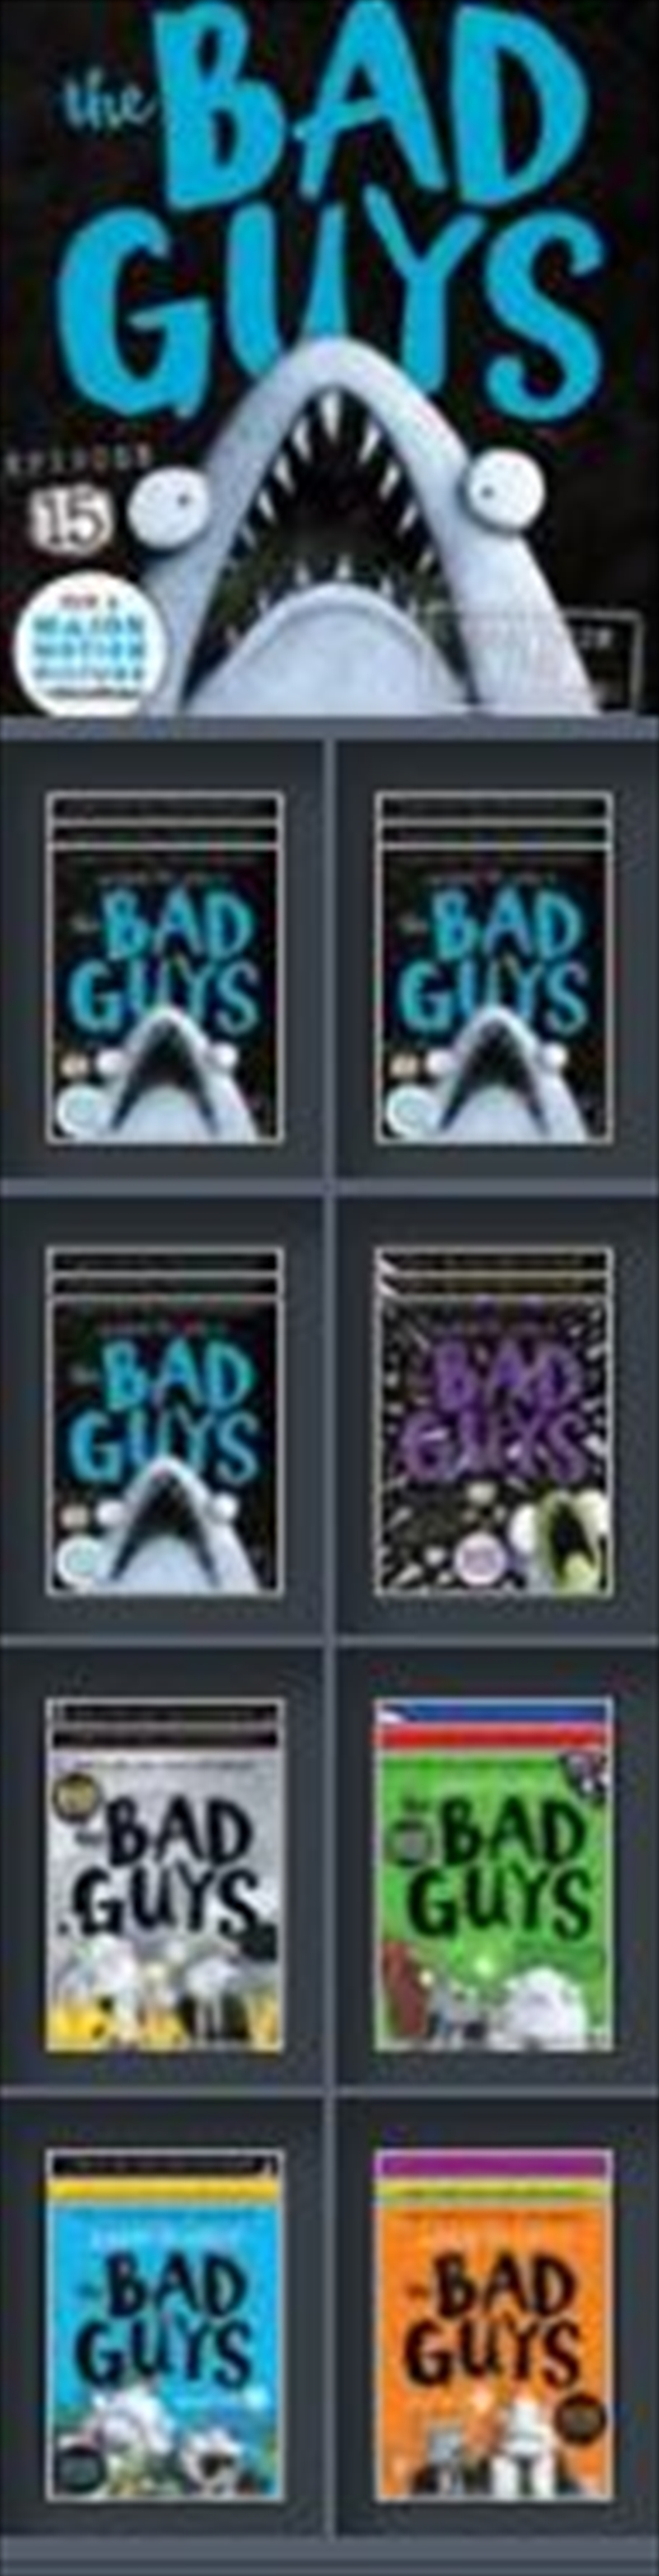 Bad Guys 15 32 Copy Mixed Bin/Product Detail/Childrens Fiction Books